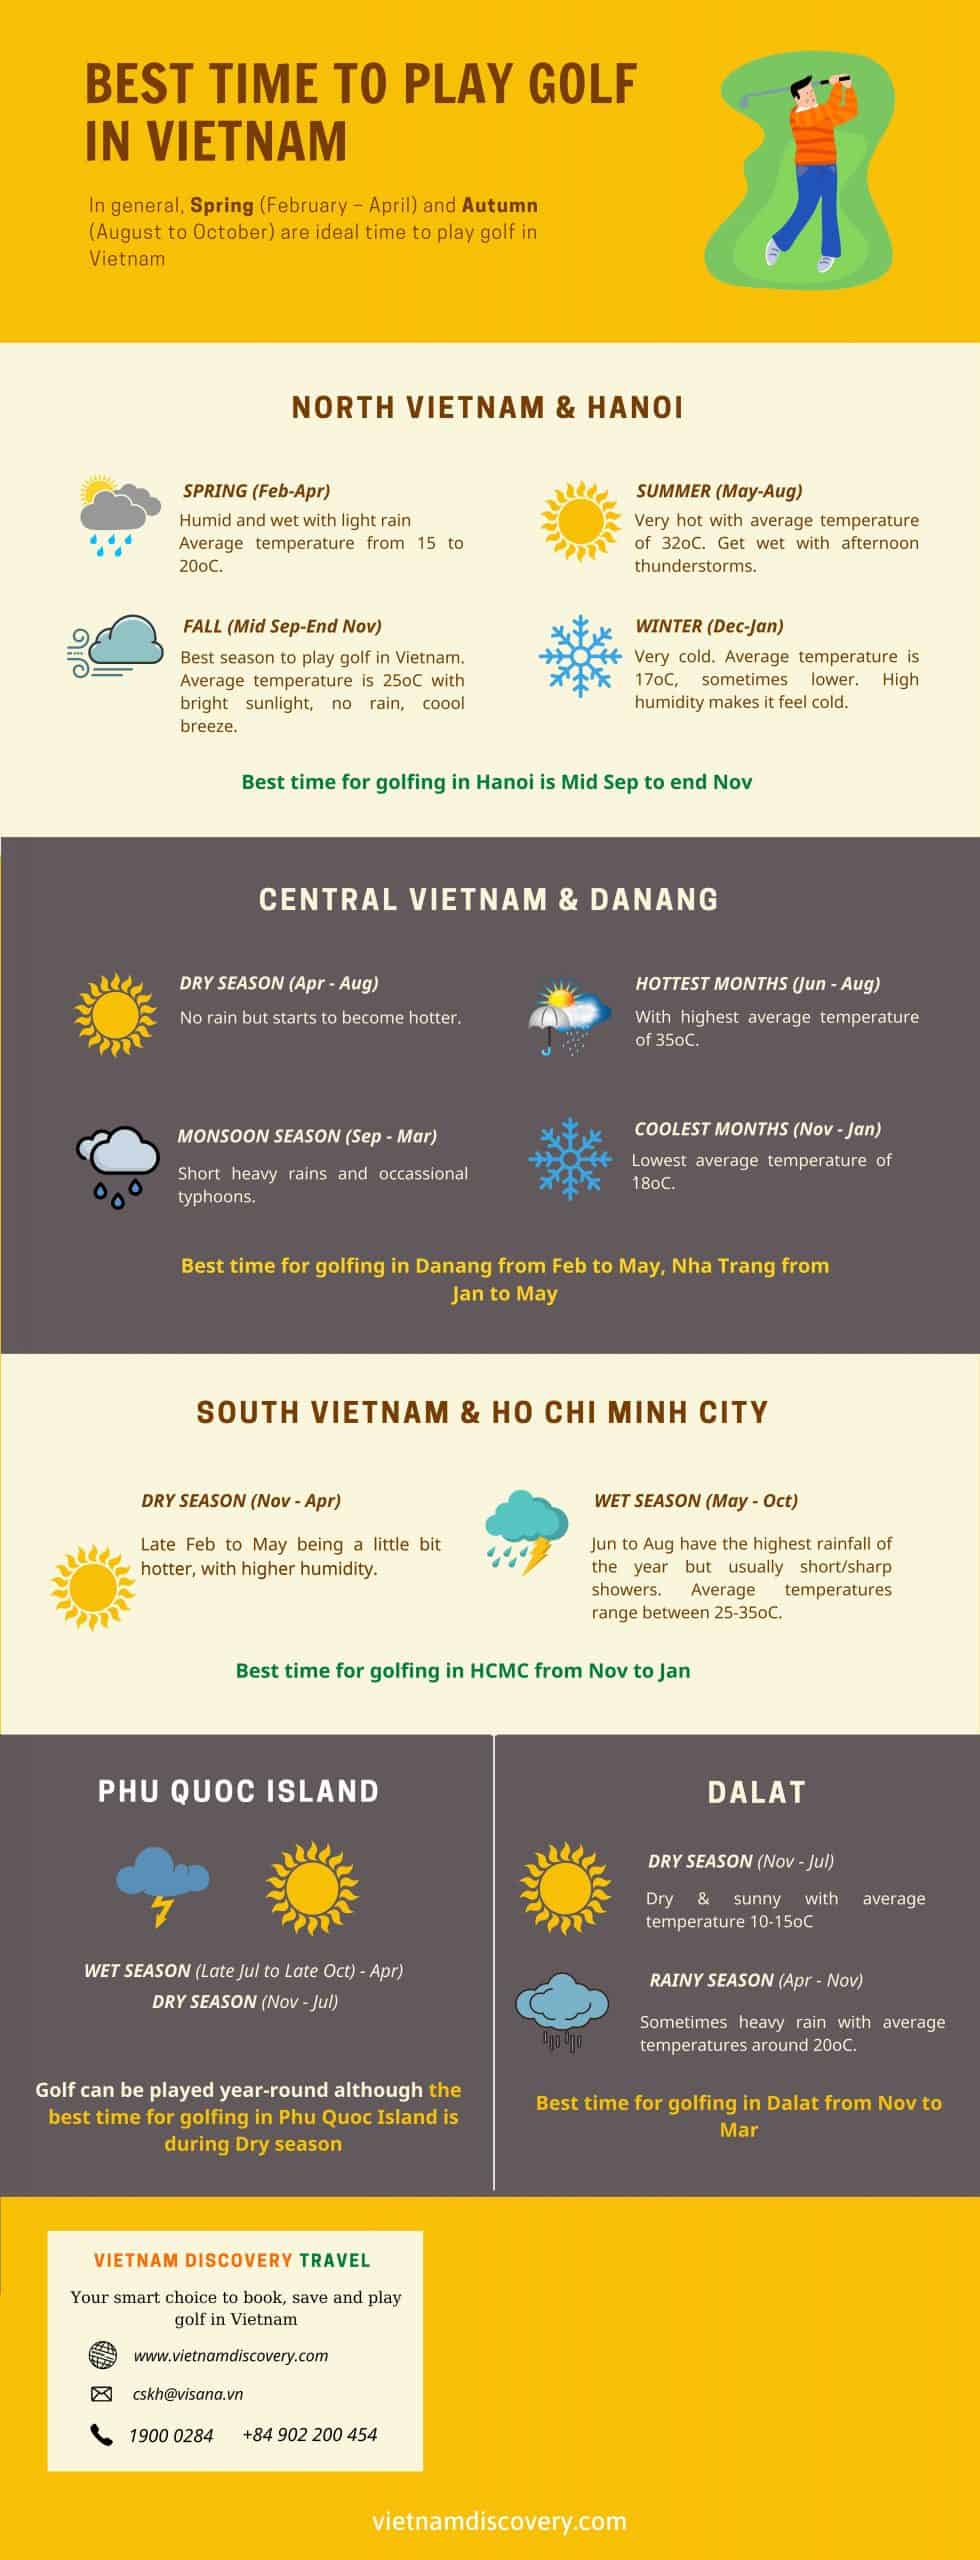 Best time to play golf in Vietnam